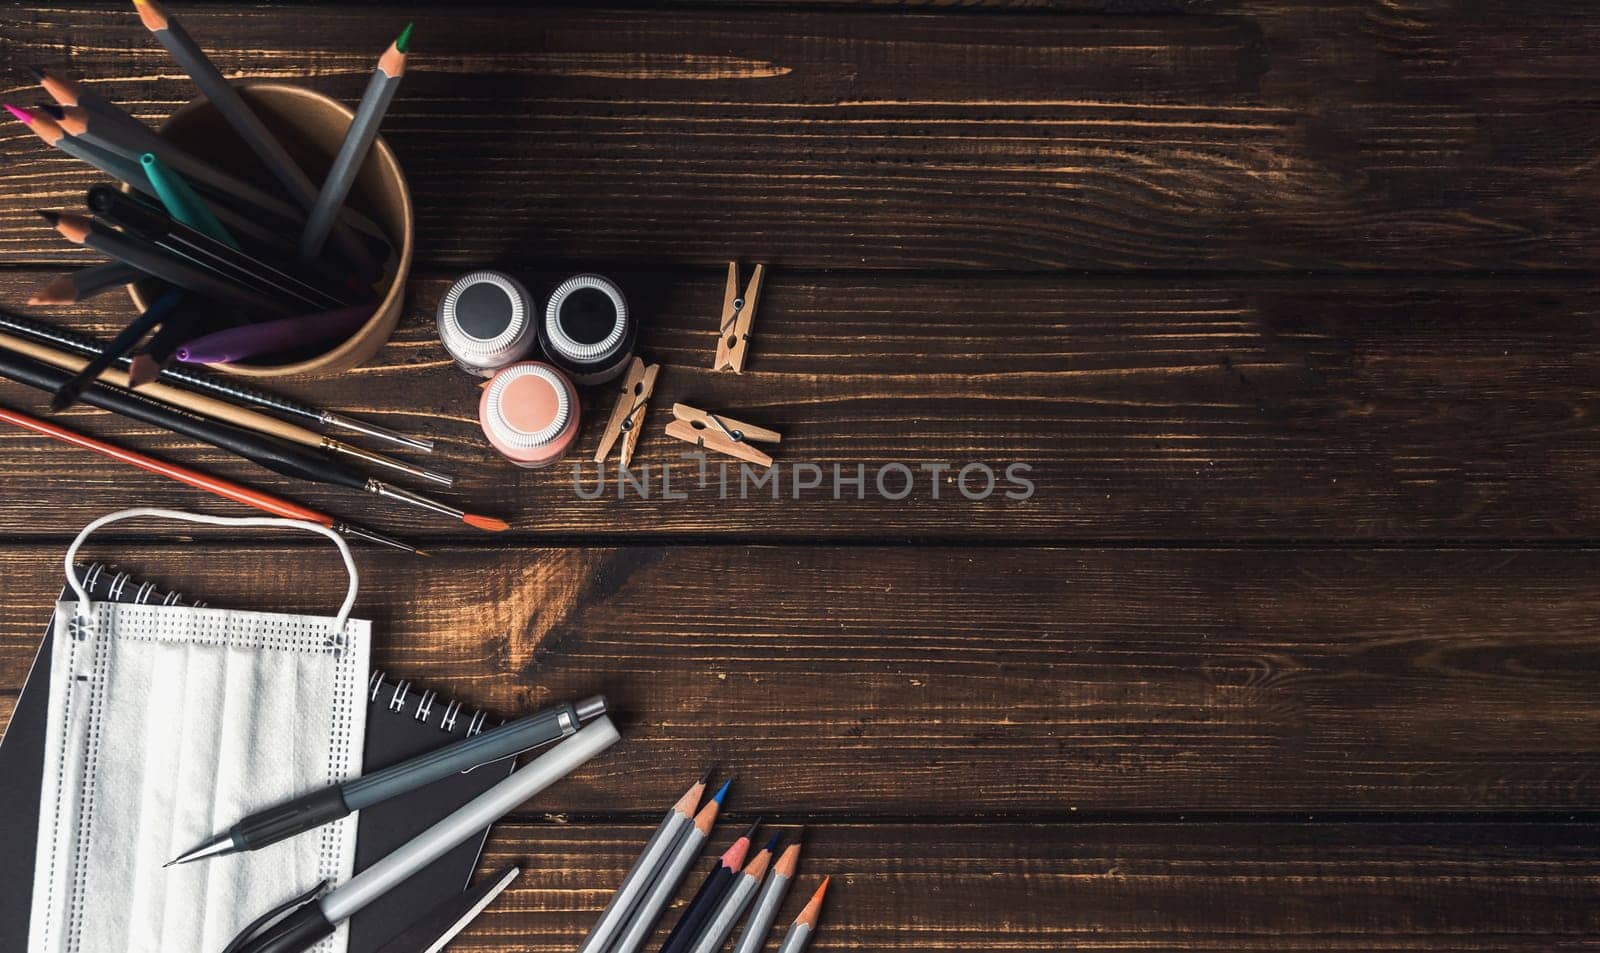 A wooden table with a variety of art supplies and a face mask. The supplies include pencils, pens, and markers, while the face mask is placed on the table. The scene suggests a creative